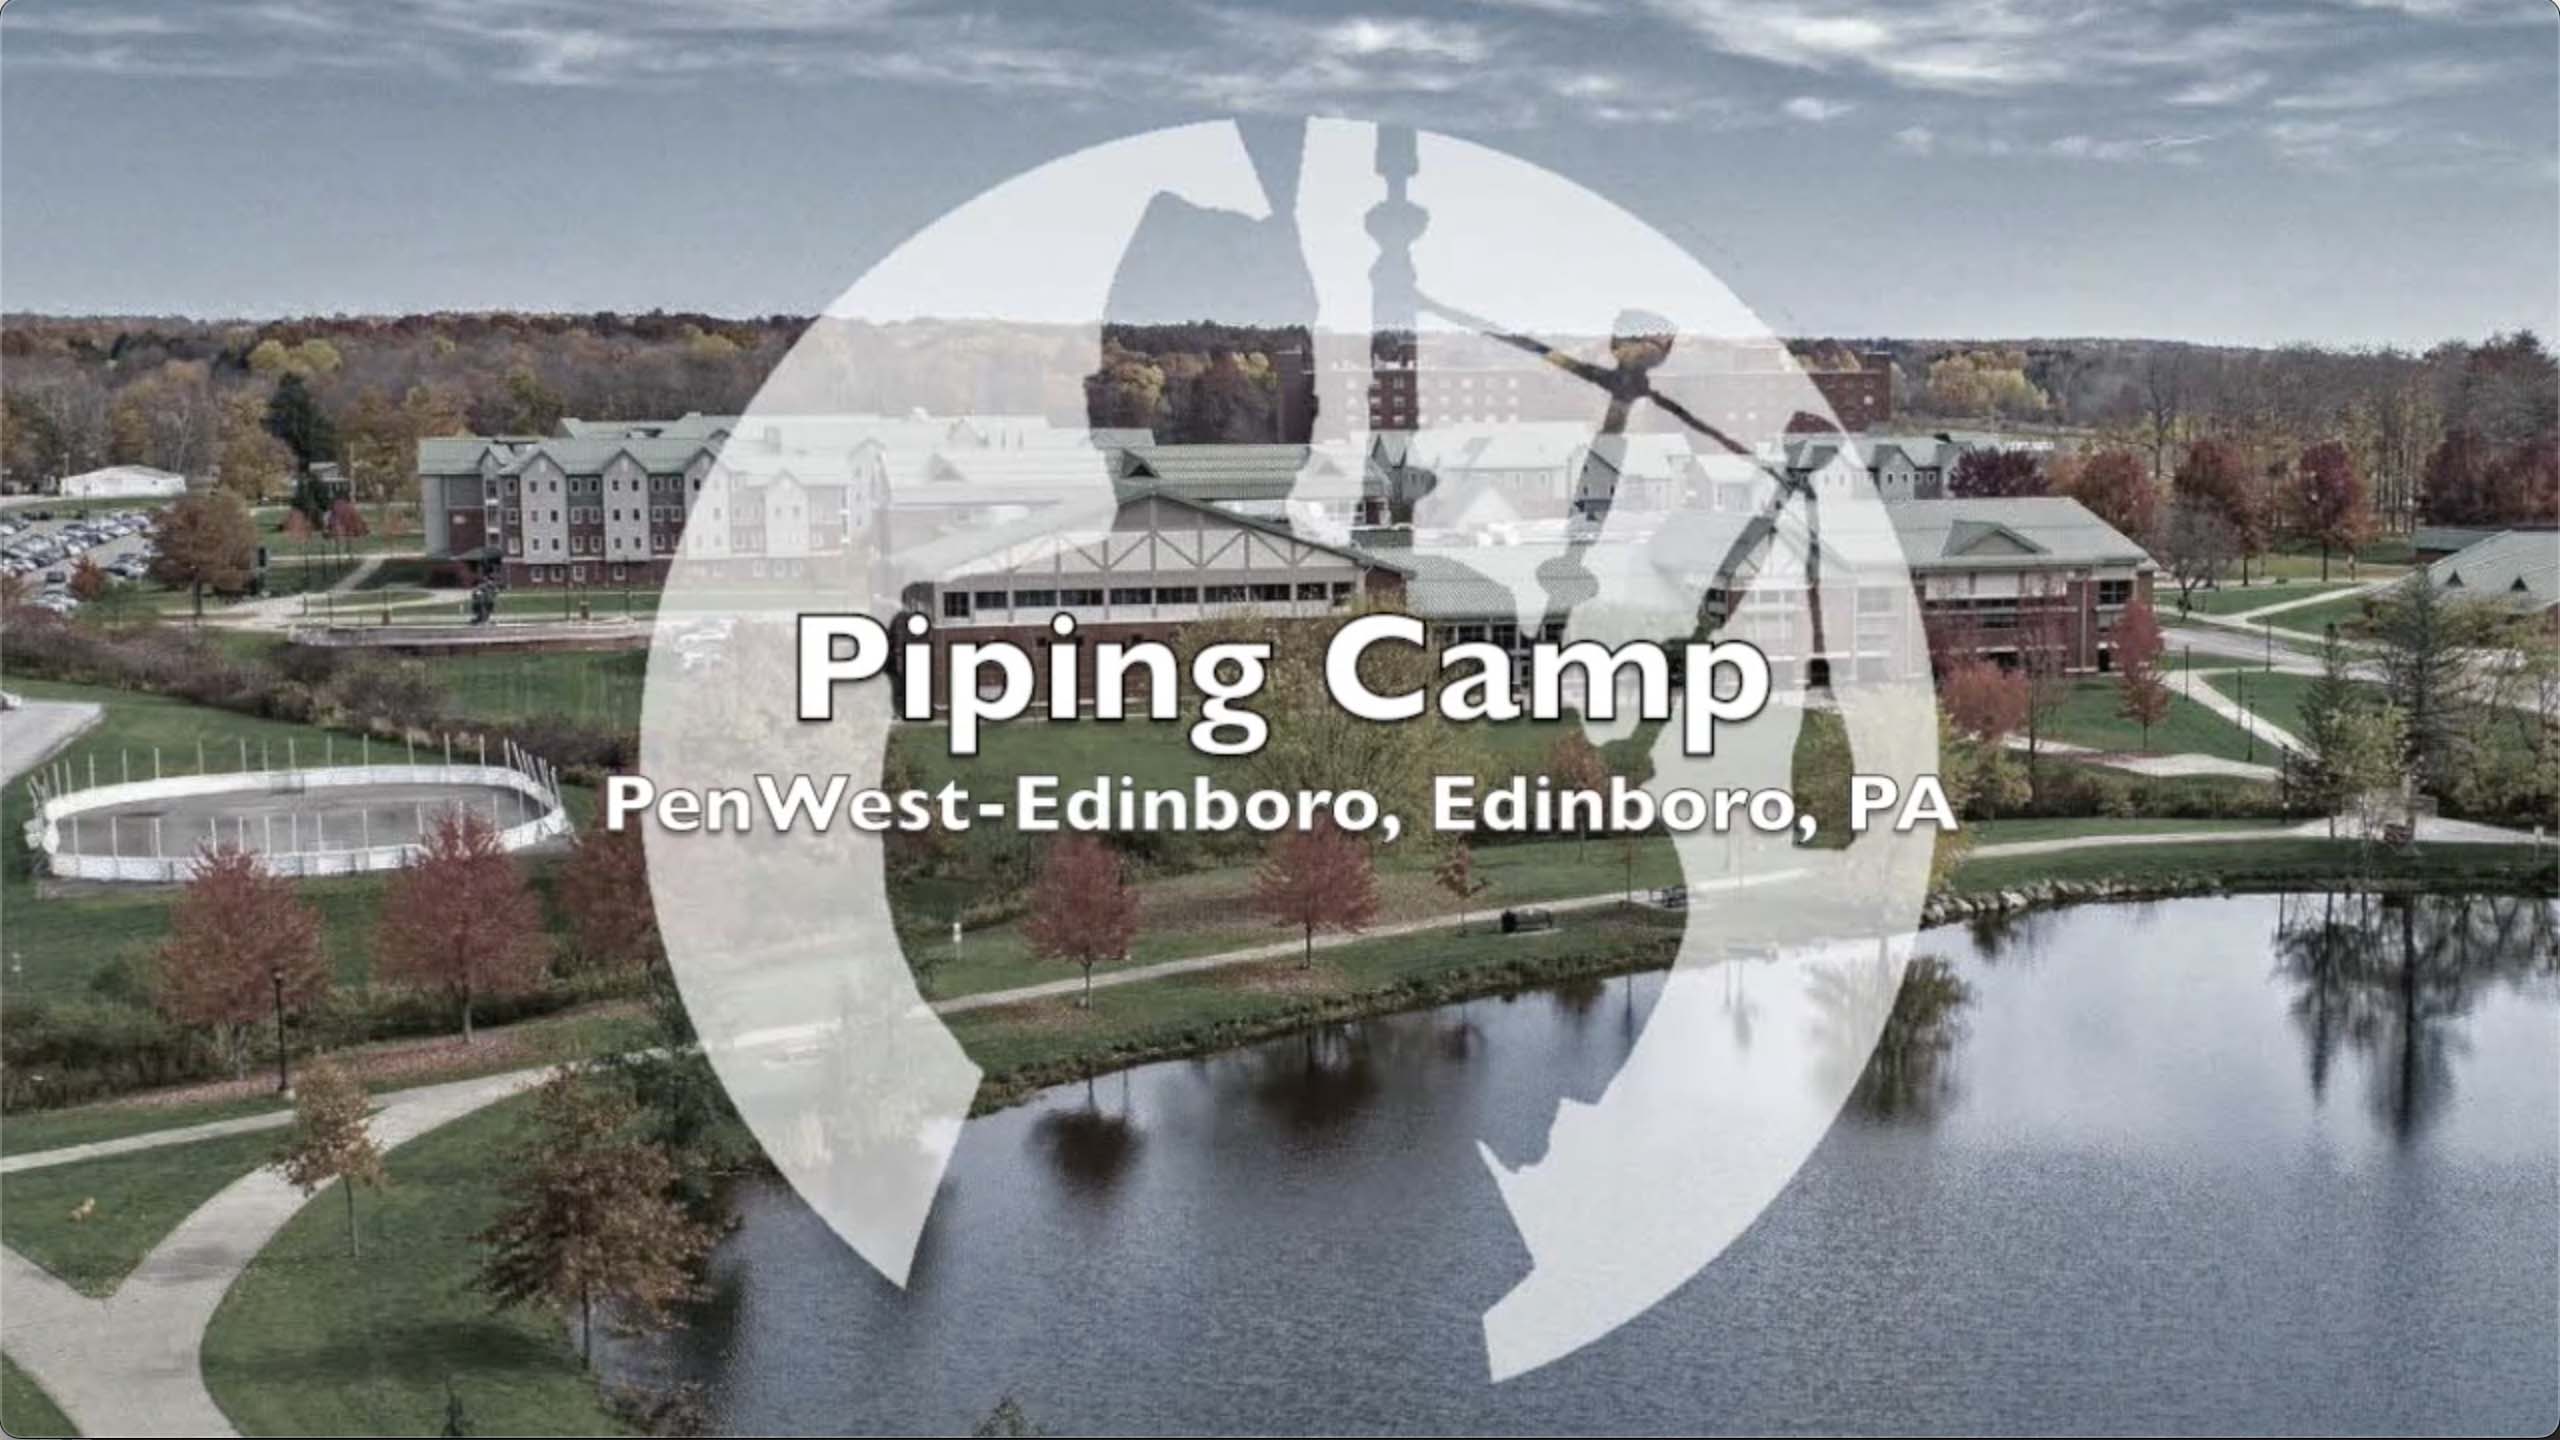 Terry Tully, Roddy MacLeod, and Miles Bennington will teach at Balmoral's summer Piping Camp to be held held on the beautiful Kutztown University campus, Kutztown, PA, from July 14-19, 2004.